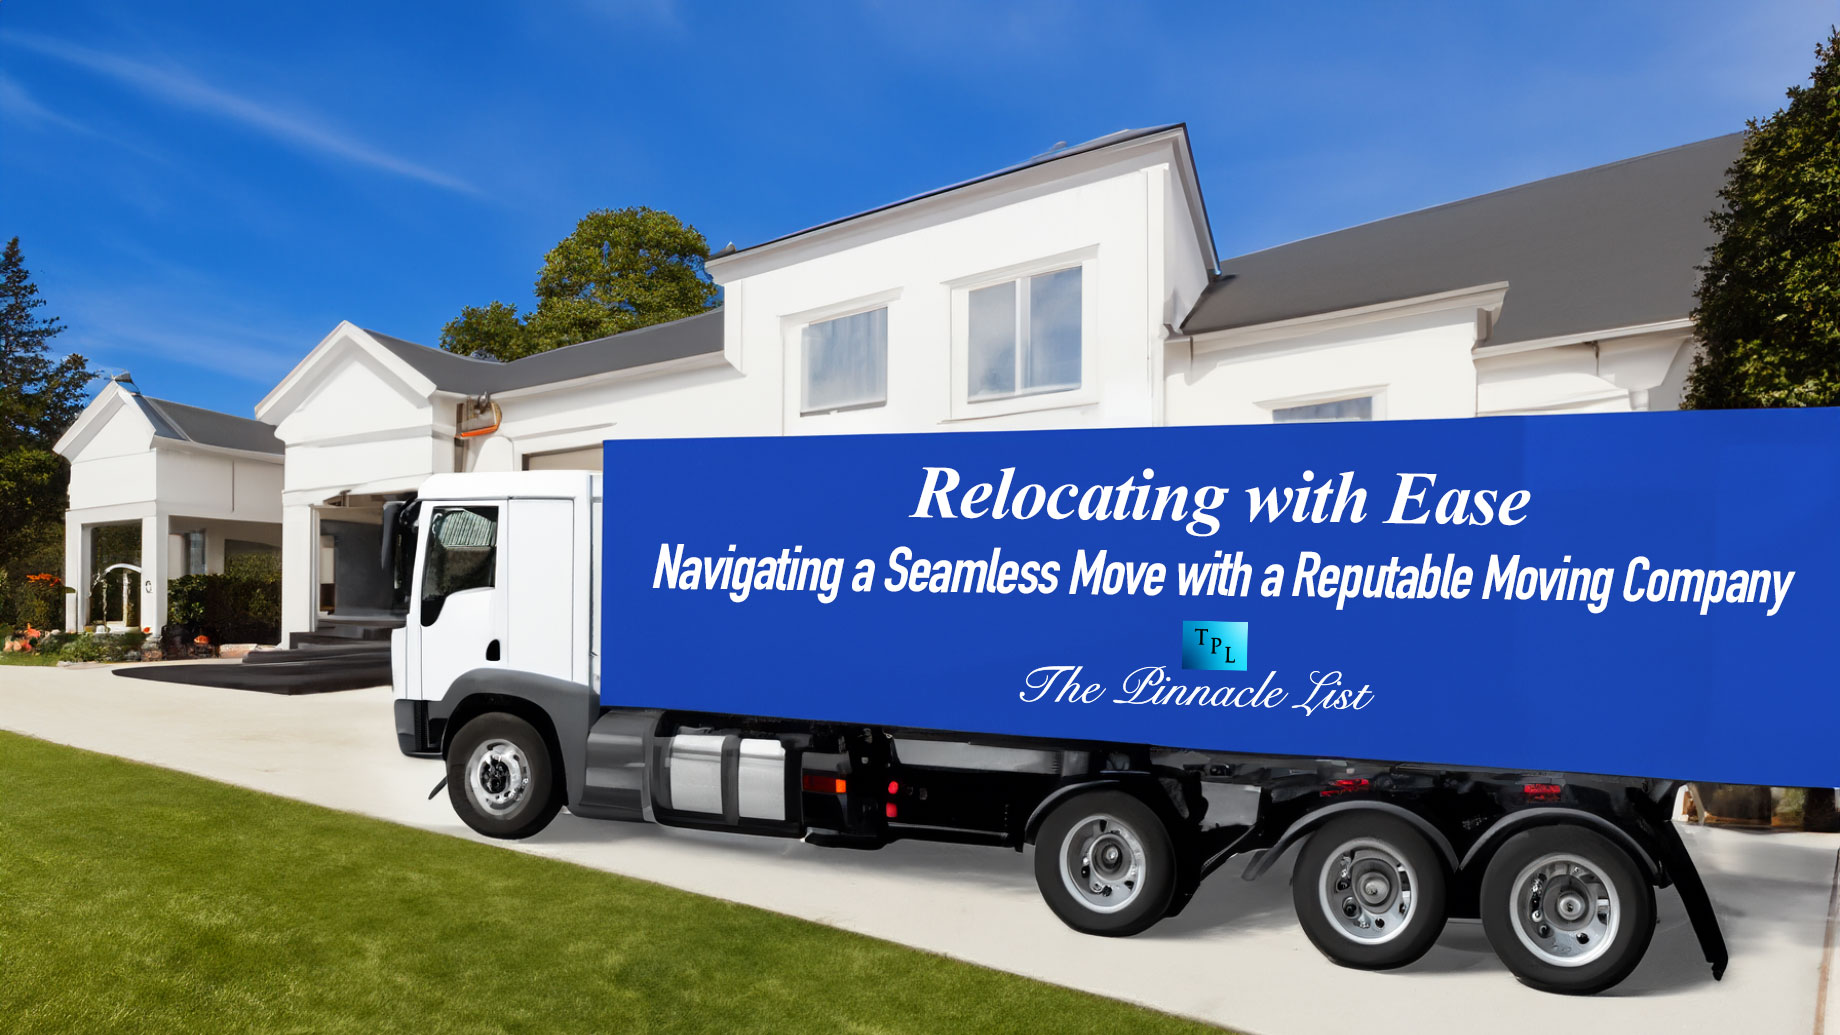 Relocating with Ease: Navigating a Seamless Move with a Reputable Moving Company